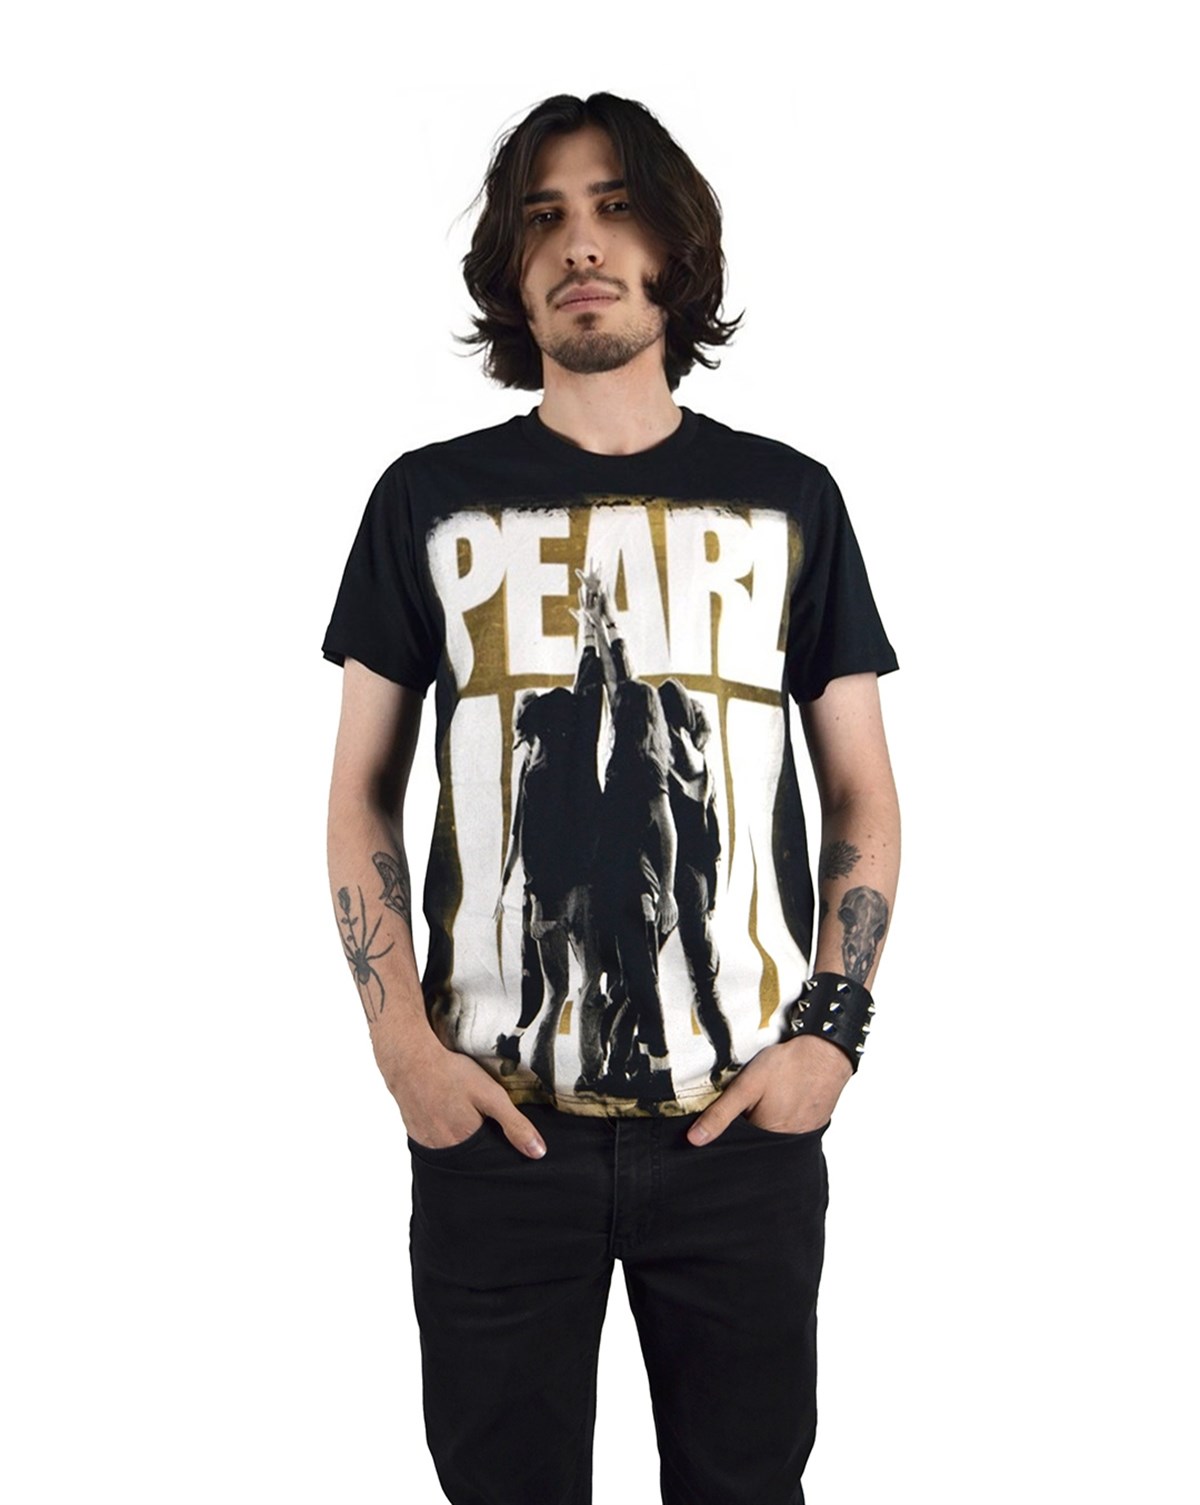 Pearl Jam T-Shirts for Sale